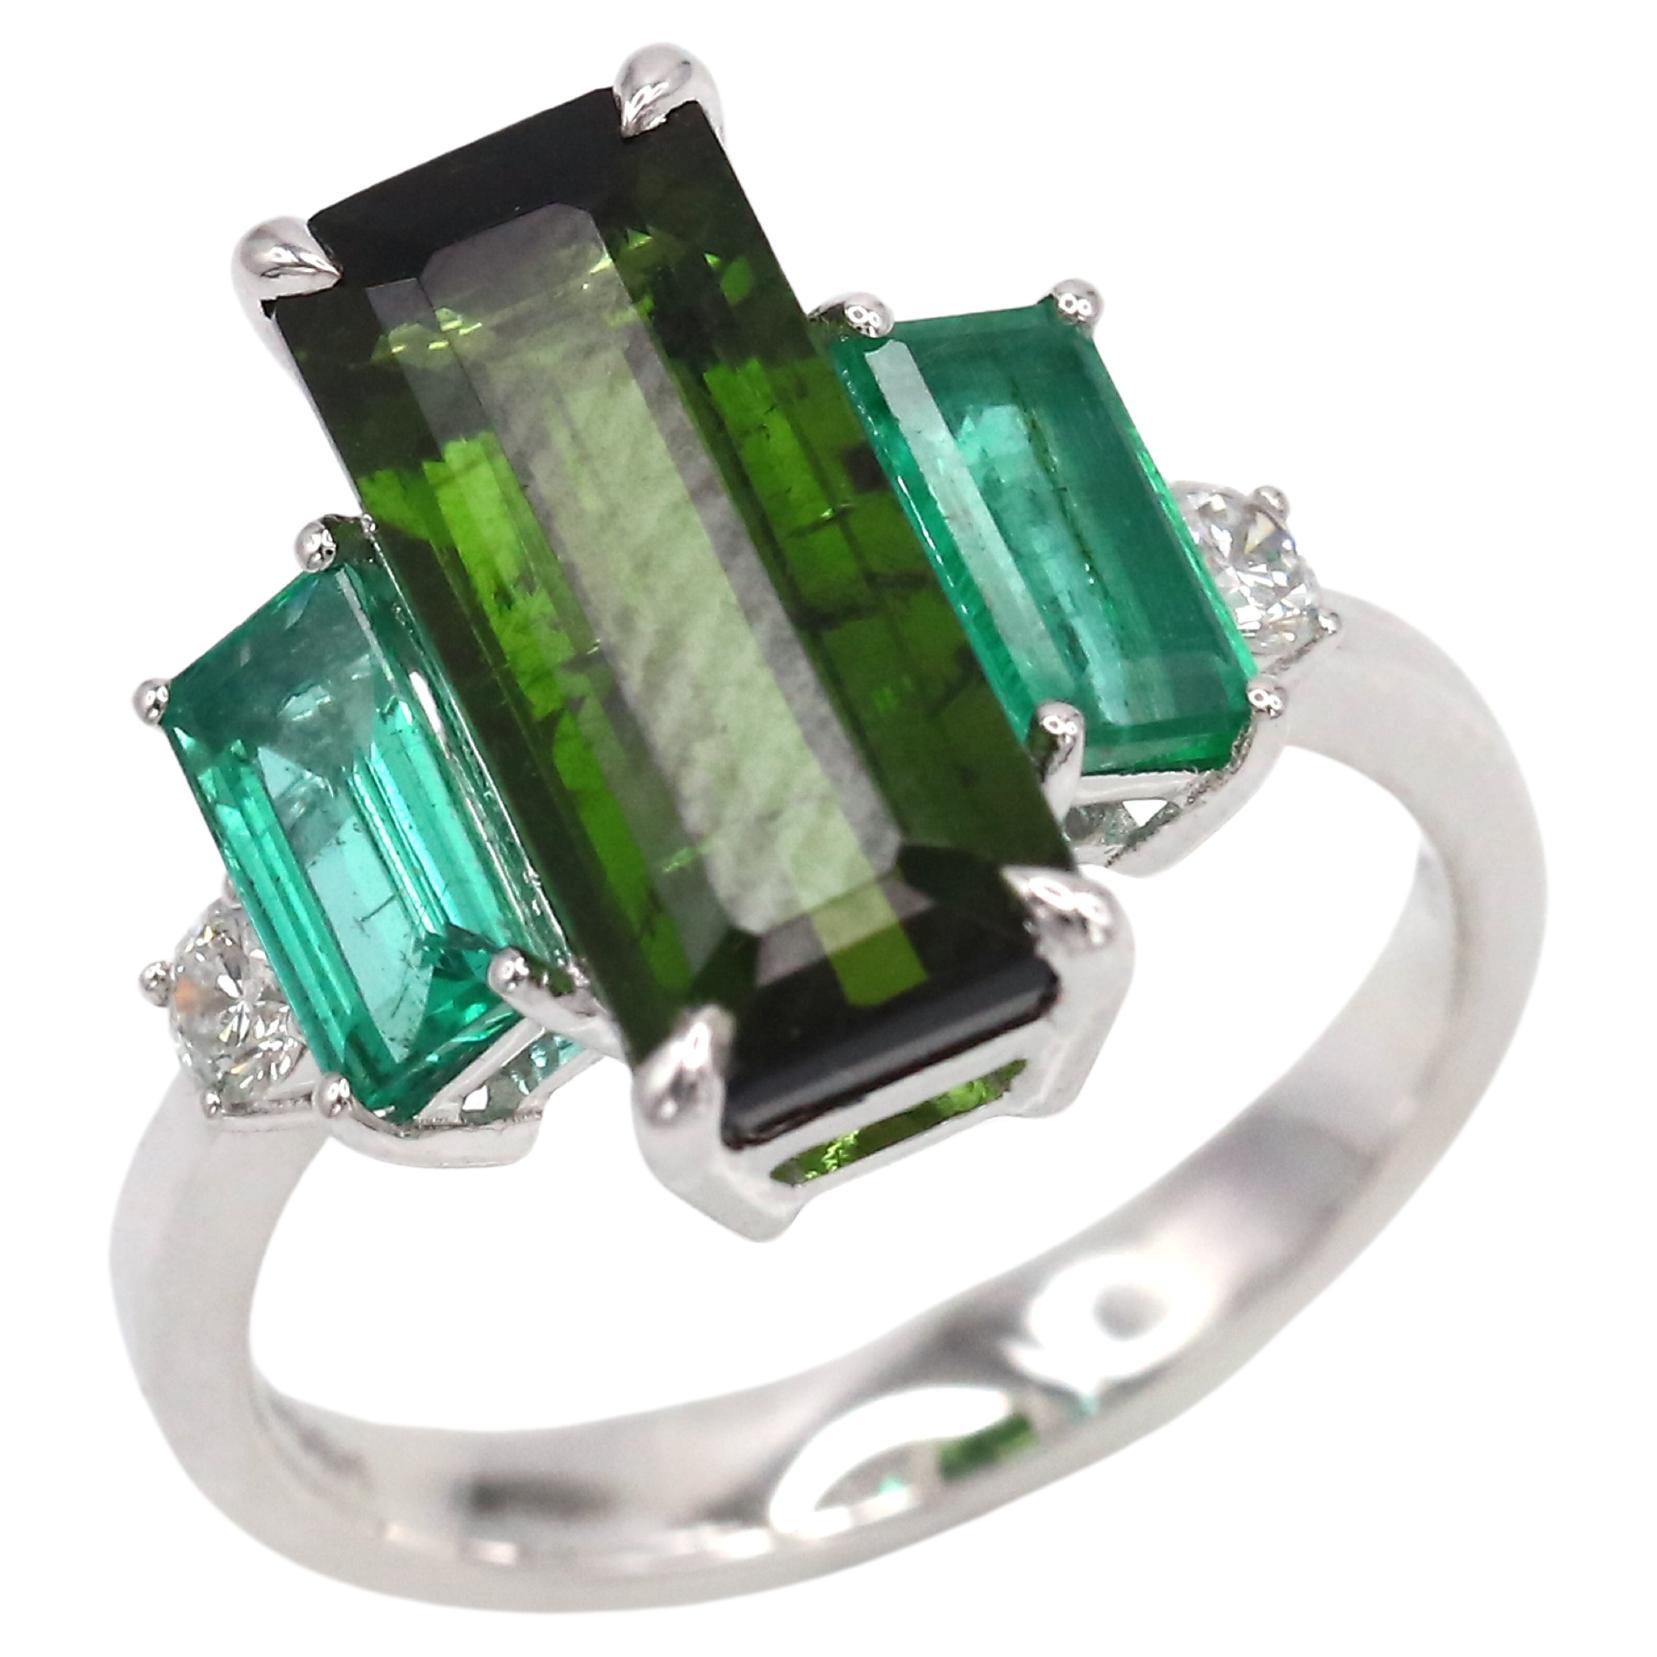 Earrings (Matching Ring Available)

18K White Gold 

Emerald 

Diamond 

Green Tourmaline 

Exquisite 18k white gold dangle earrings feature a captivating ensemble, including six custom-cut round diamonds totaling 0.49 carats. Additionally, six